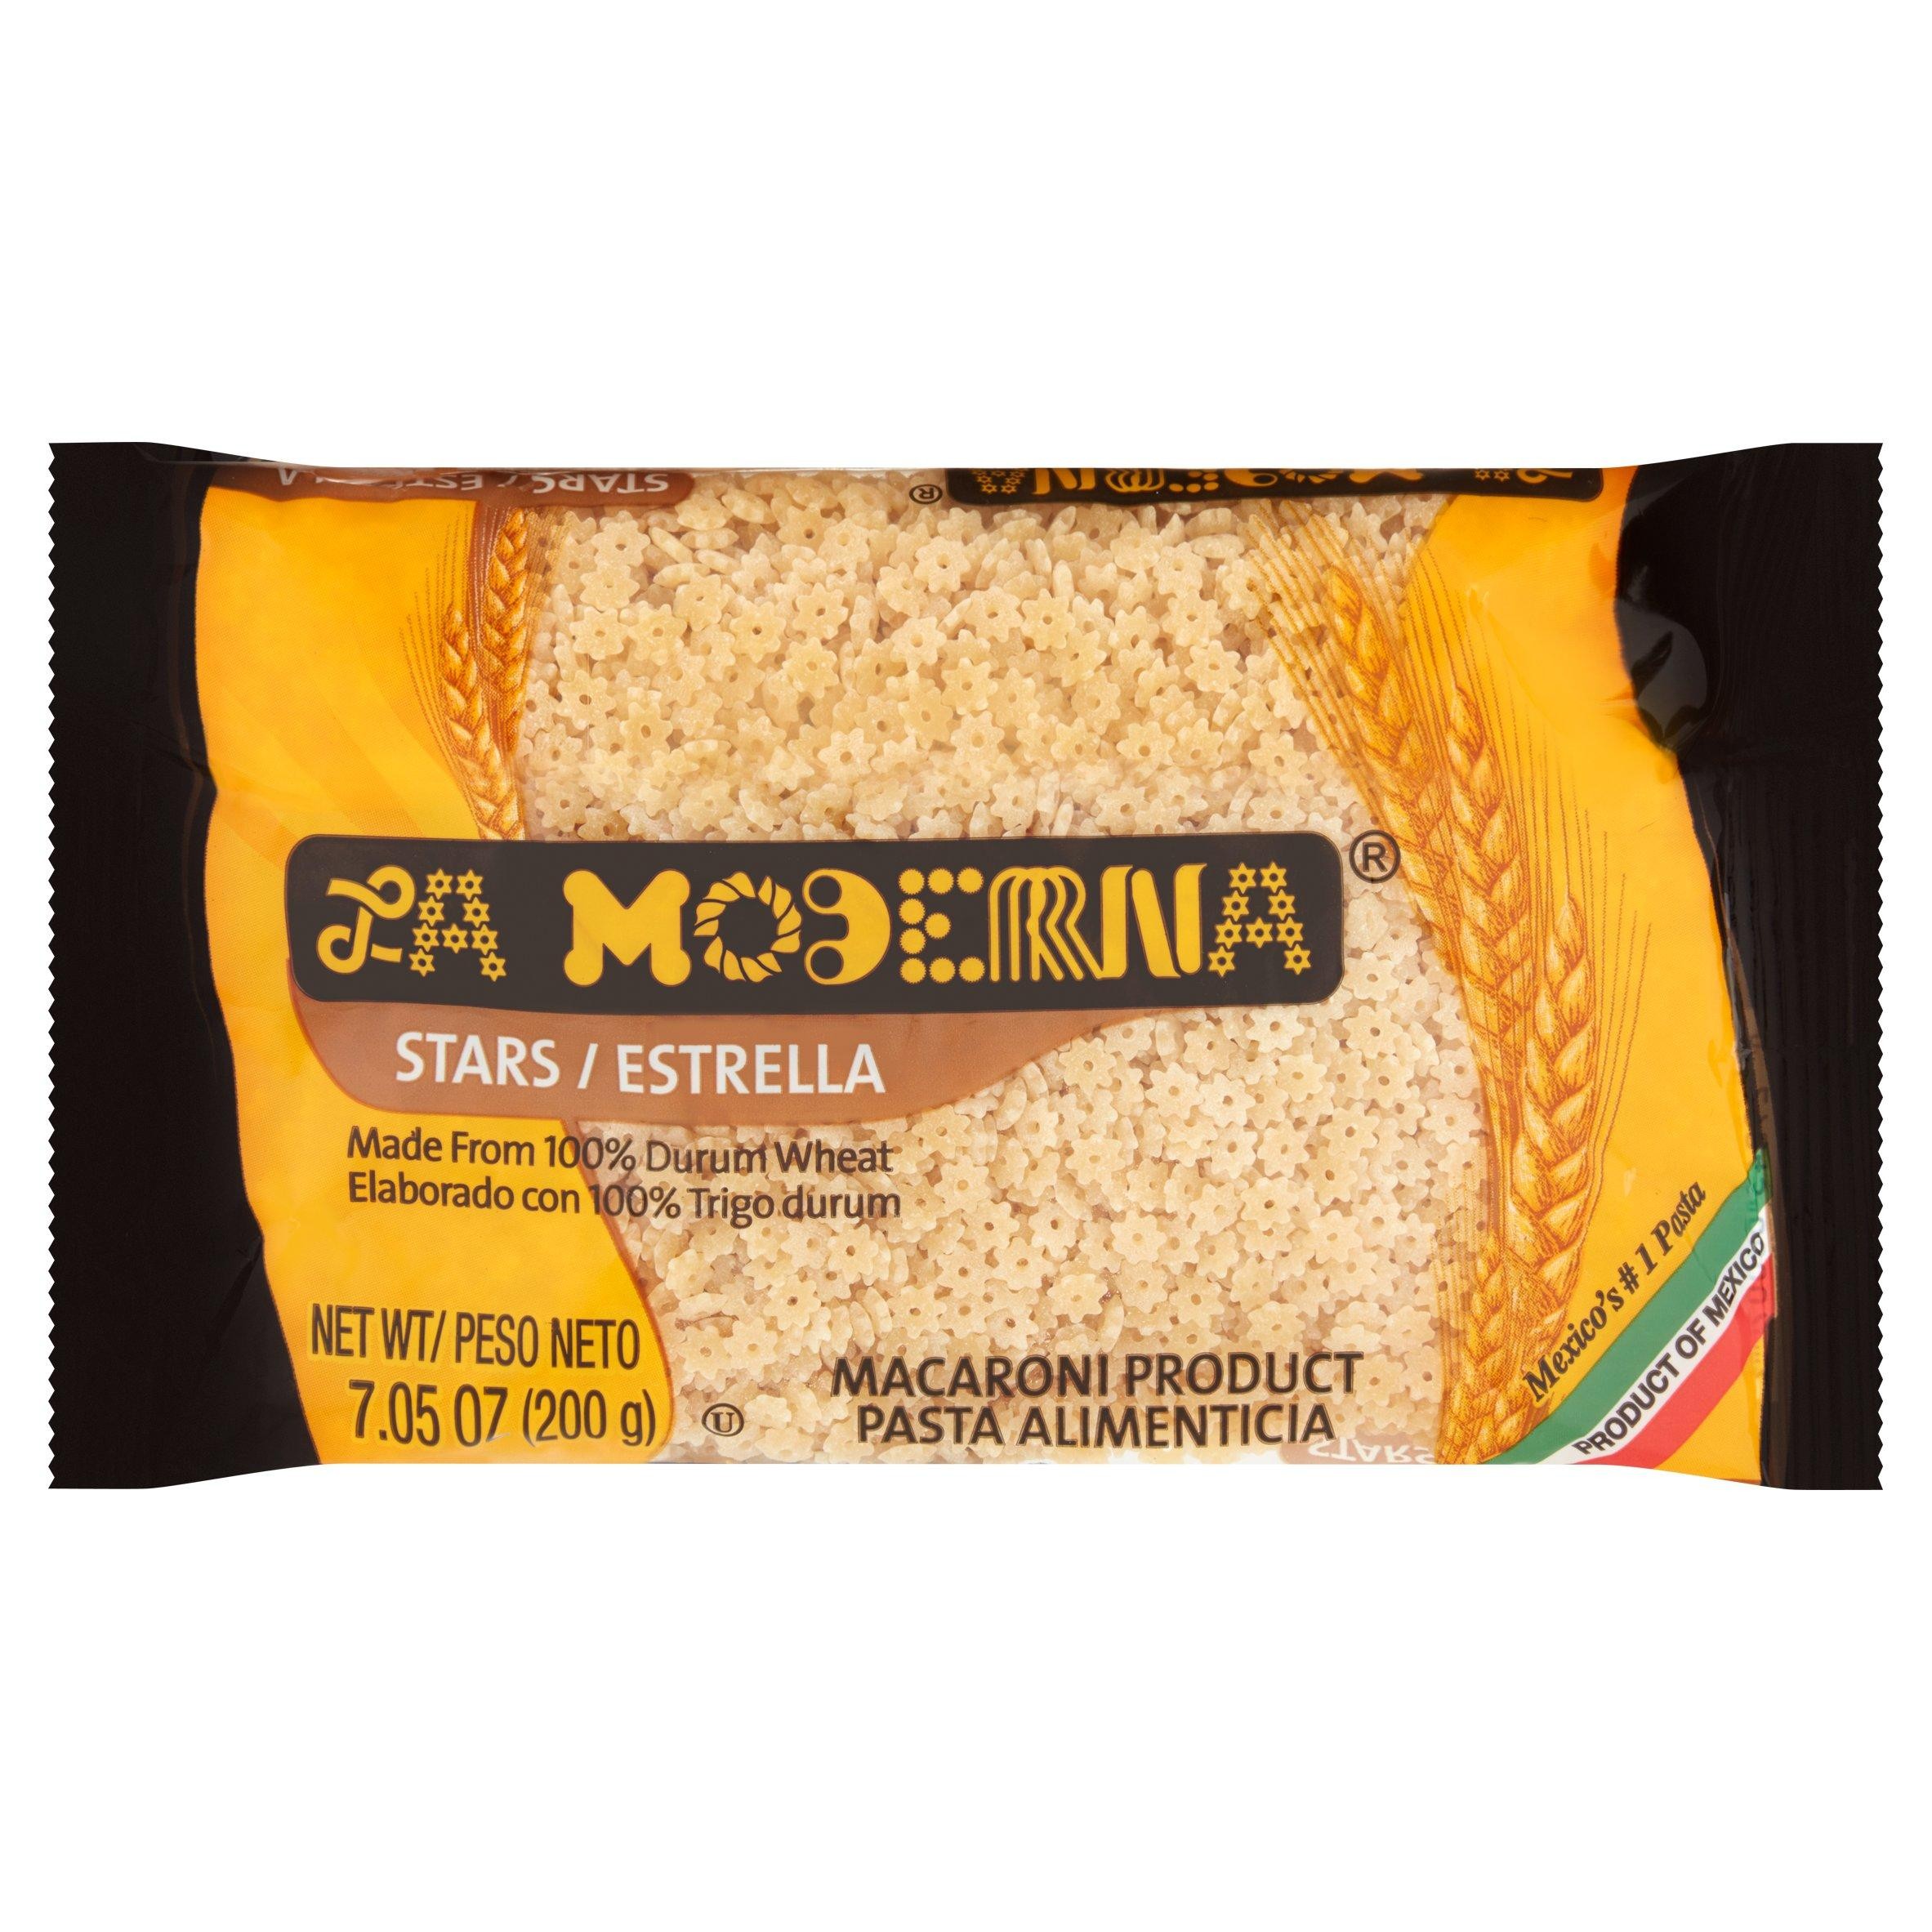 La Moderna Star Pasta Has Been of Preference for Many Generations  Made from 100% Durum Wheat with a 7 Oz Convenient Size. to Cook This Delicious Past